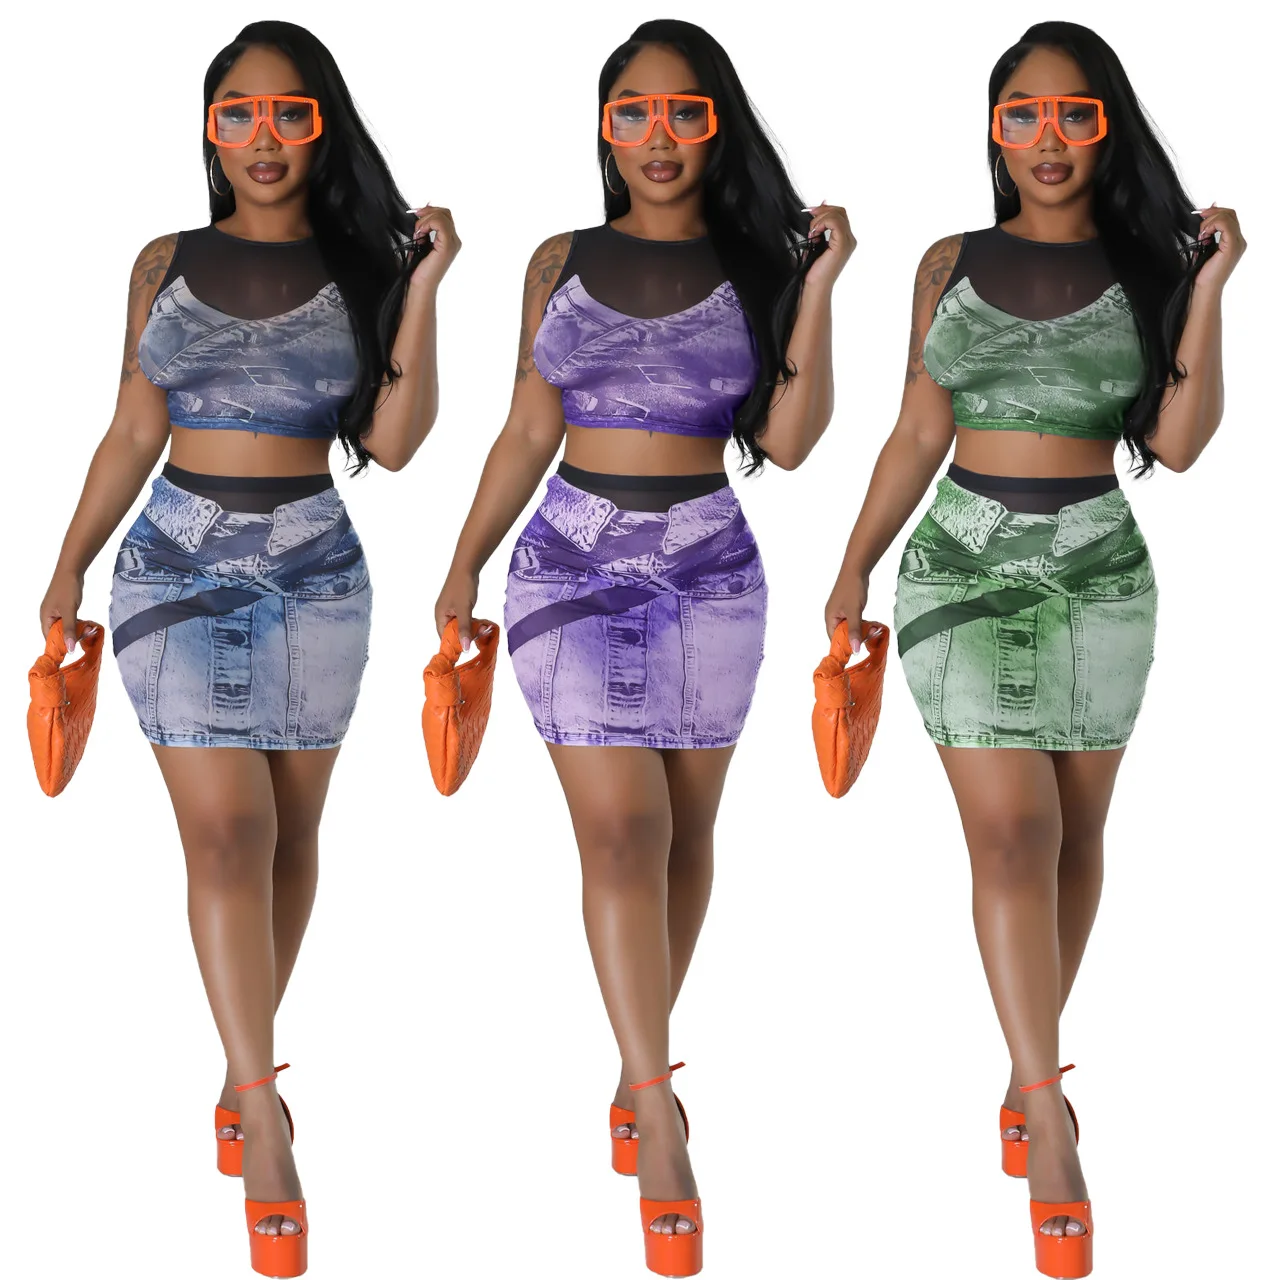 Summer hot sale 2 piece set women skirt and top sexy bodycon mesh see through casual party club wear